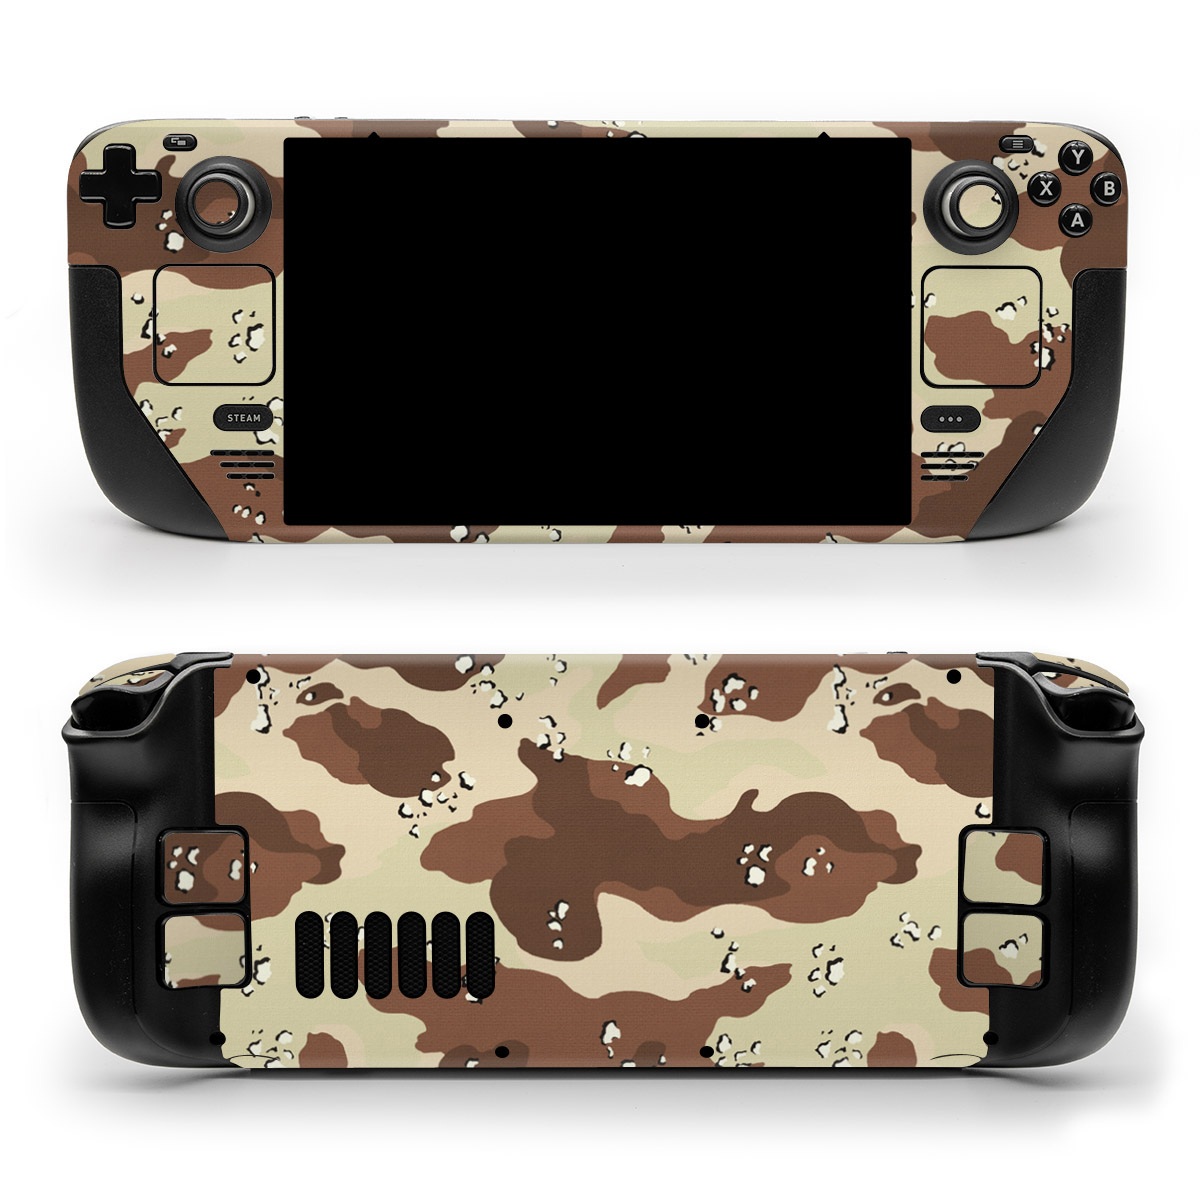 Valve Steam Deck Skin design of Military camouflage, Brown, Pattern, Design, Camouflage, Textile, Beige, Illustration, Uniform, Metal, with gray, red, black, green colors